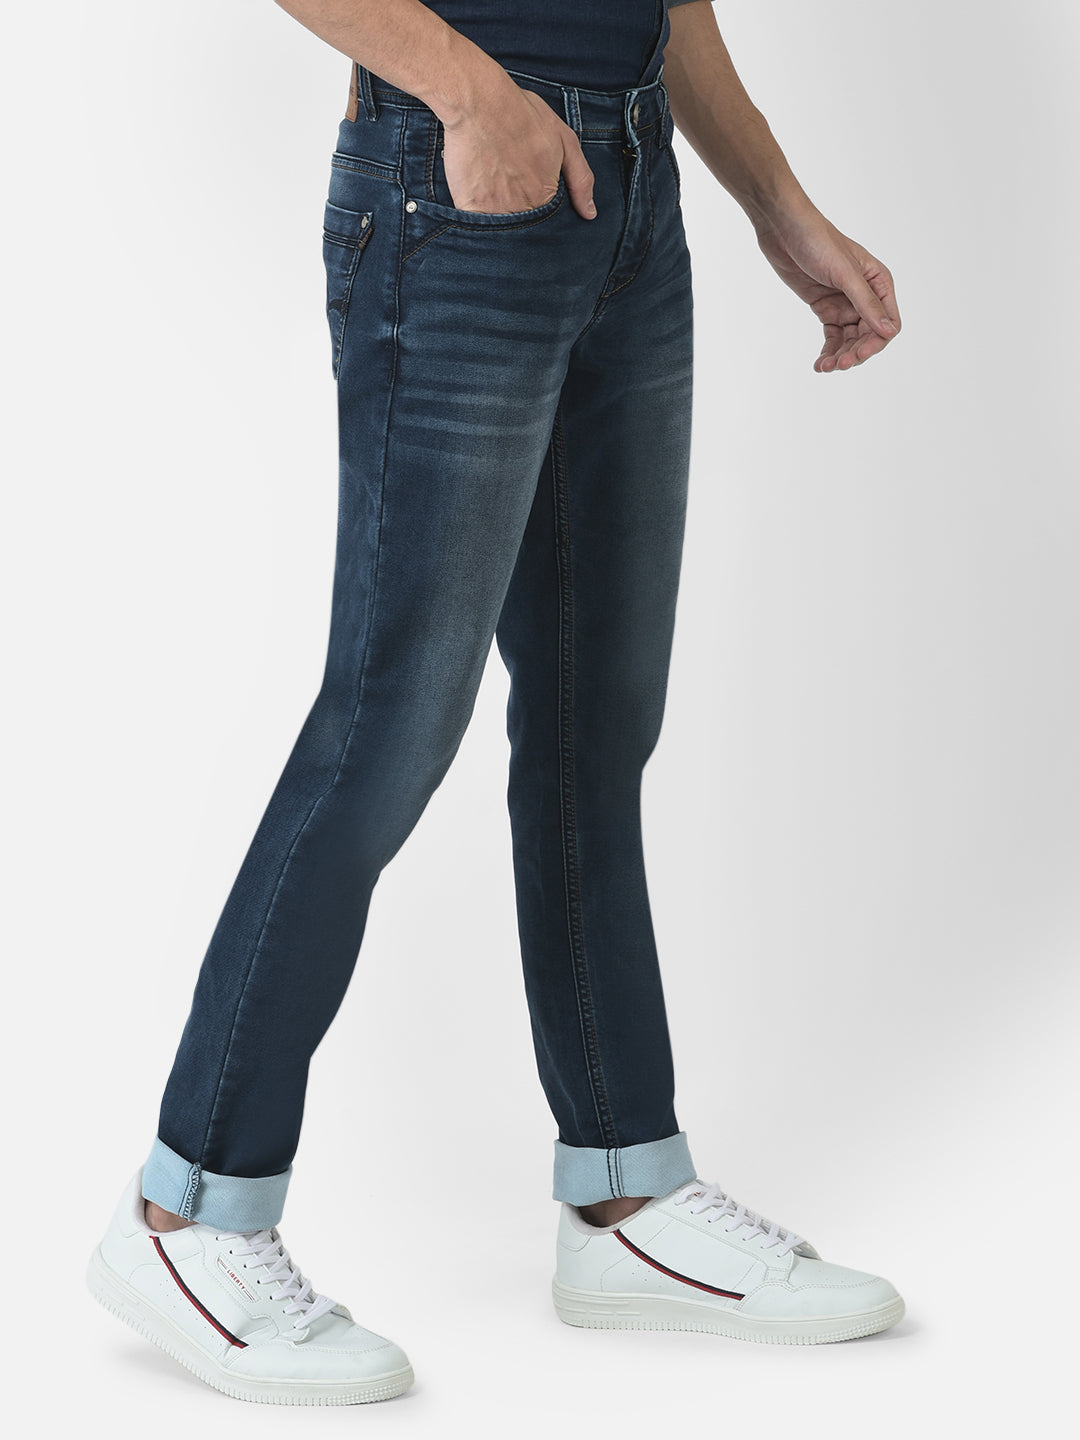 Slim-Fit Jeans with Whiskers and Chevrons Detailing 